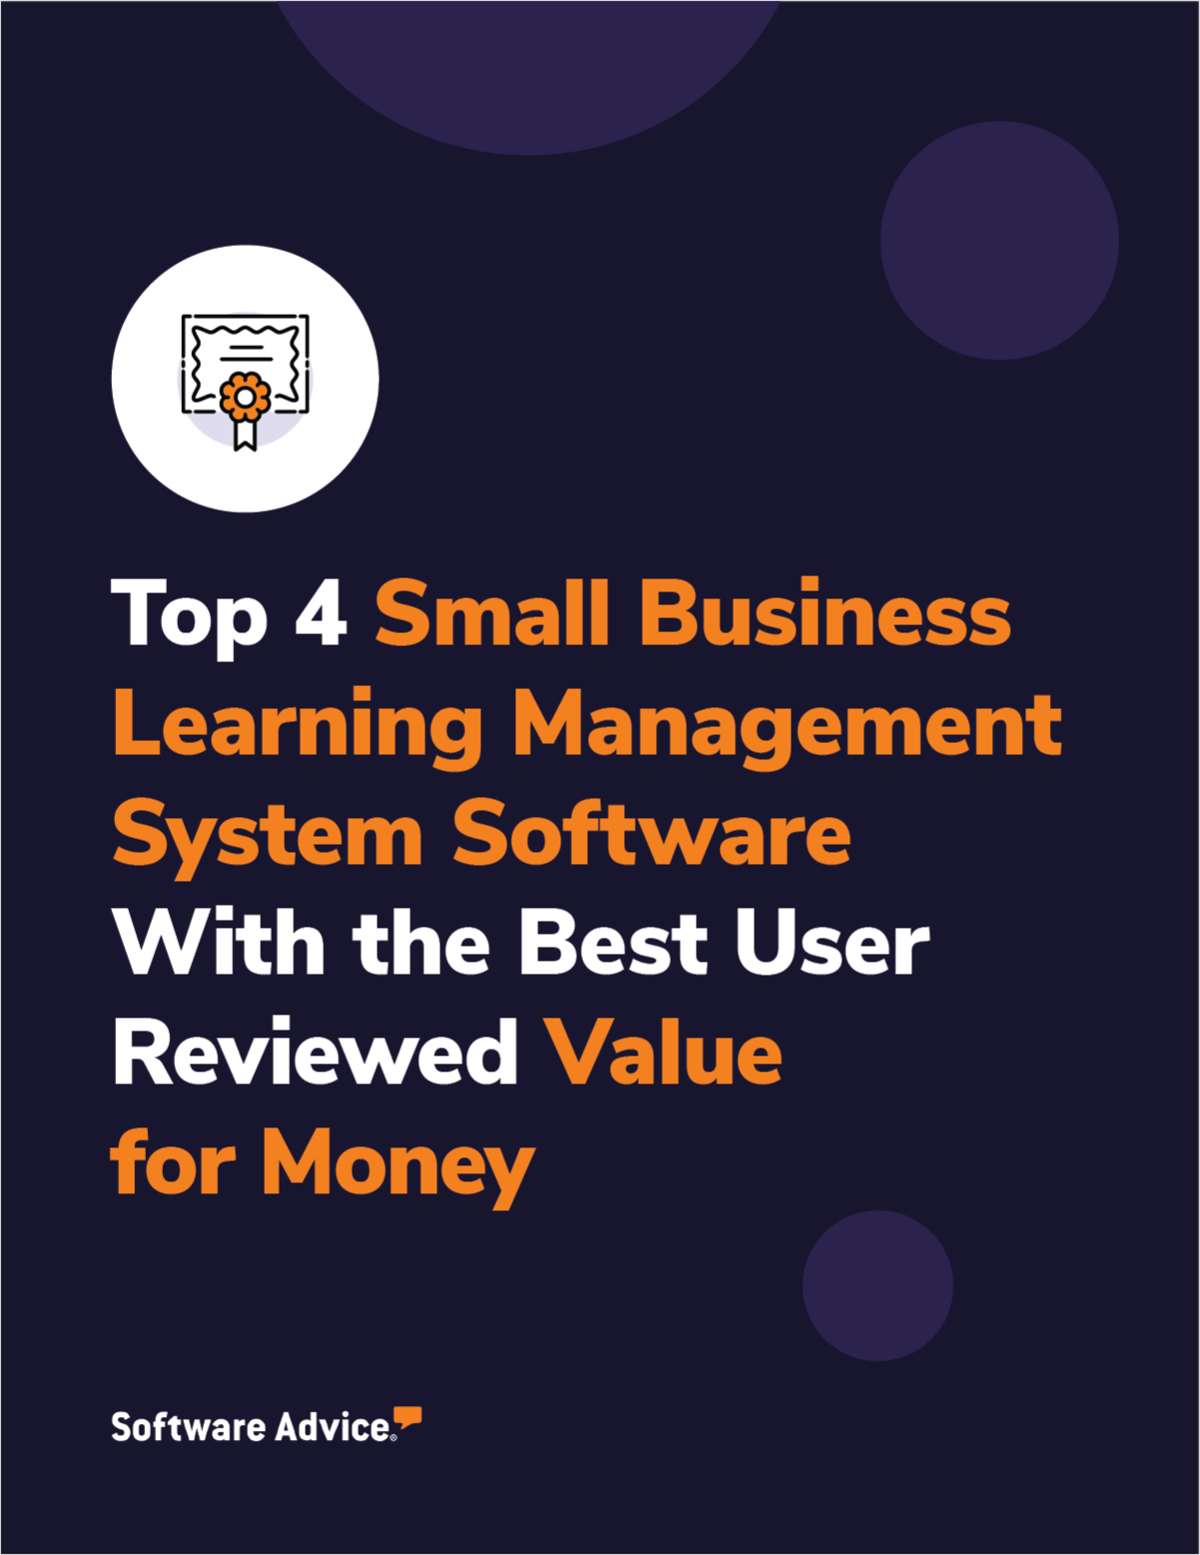 Top 4 Small Business Learning Management System Software With the Best User Reviewed Value for Money